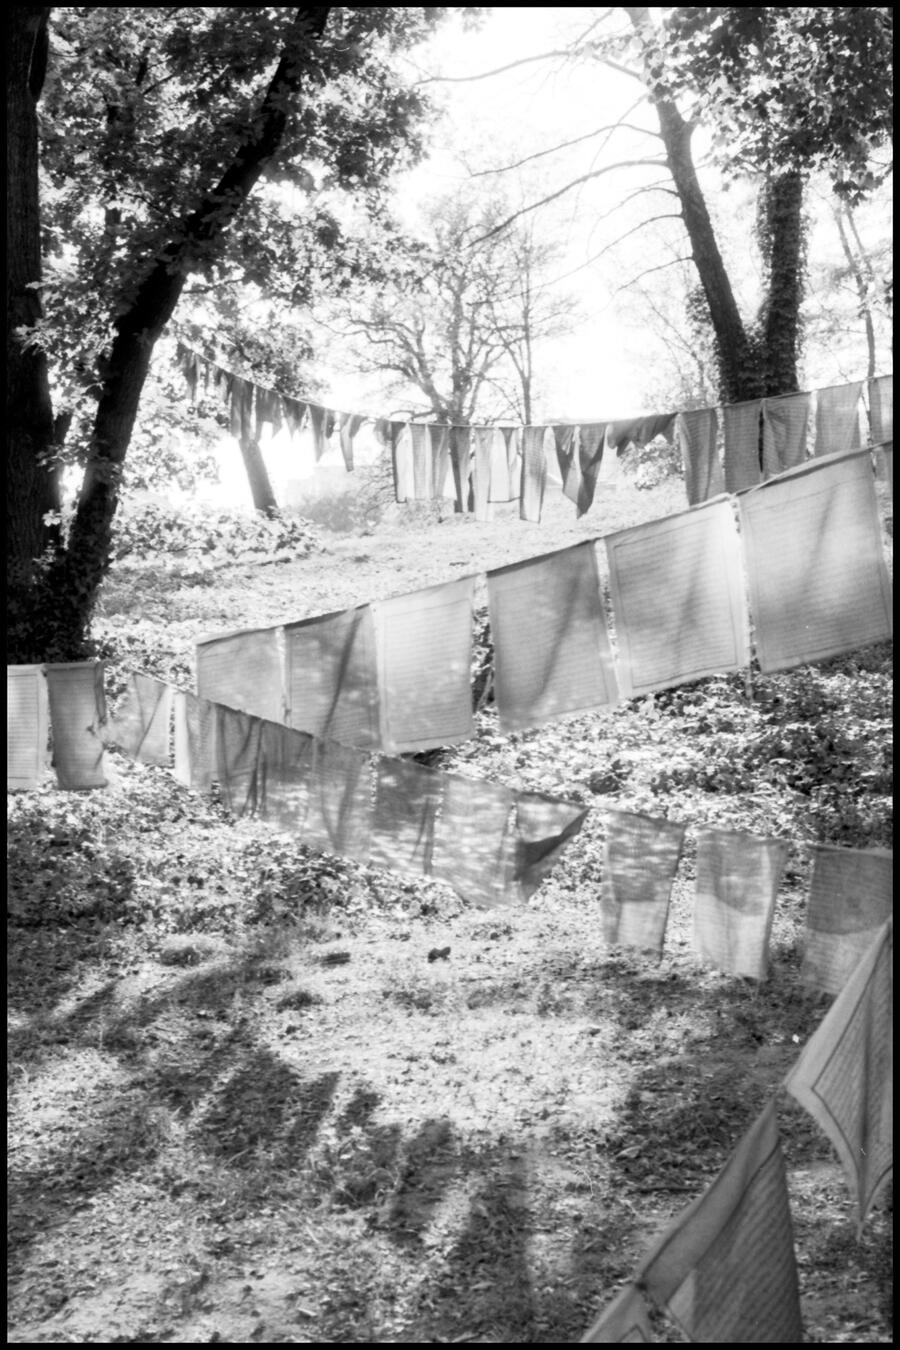 Oleksandr Navrotskyi: TE+RIS series, 2020; Image: bw photography - on a clothesline stretched between trees in a zigzag are hanging large cloths with many lines of text 